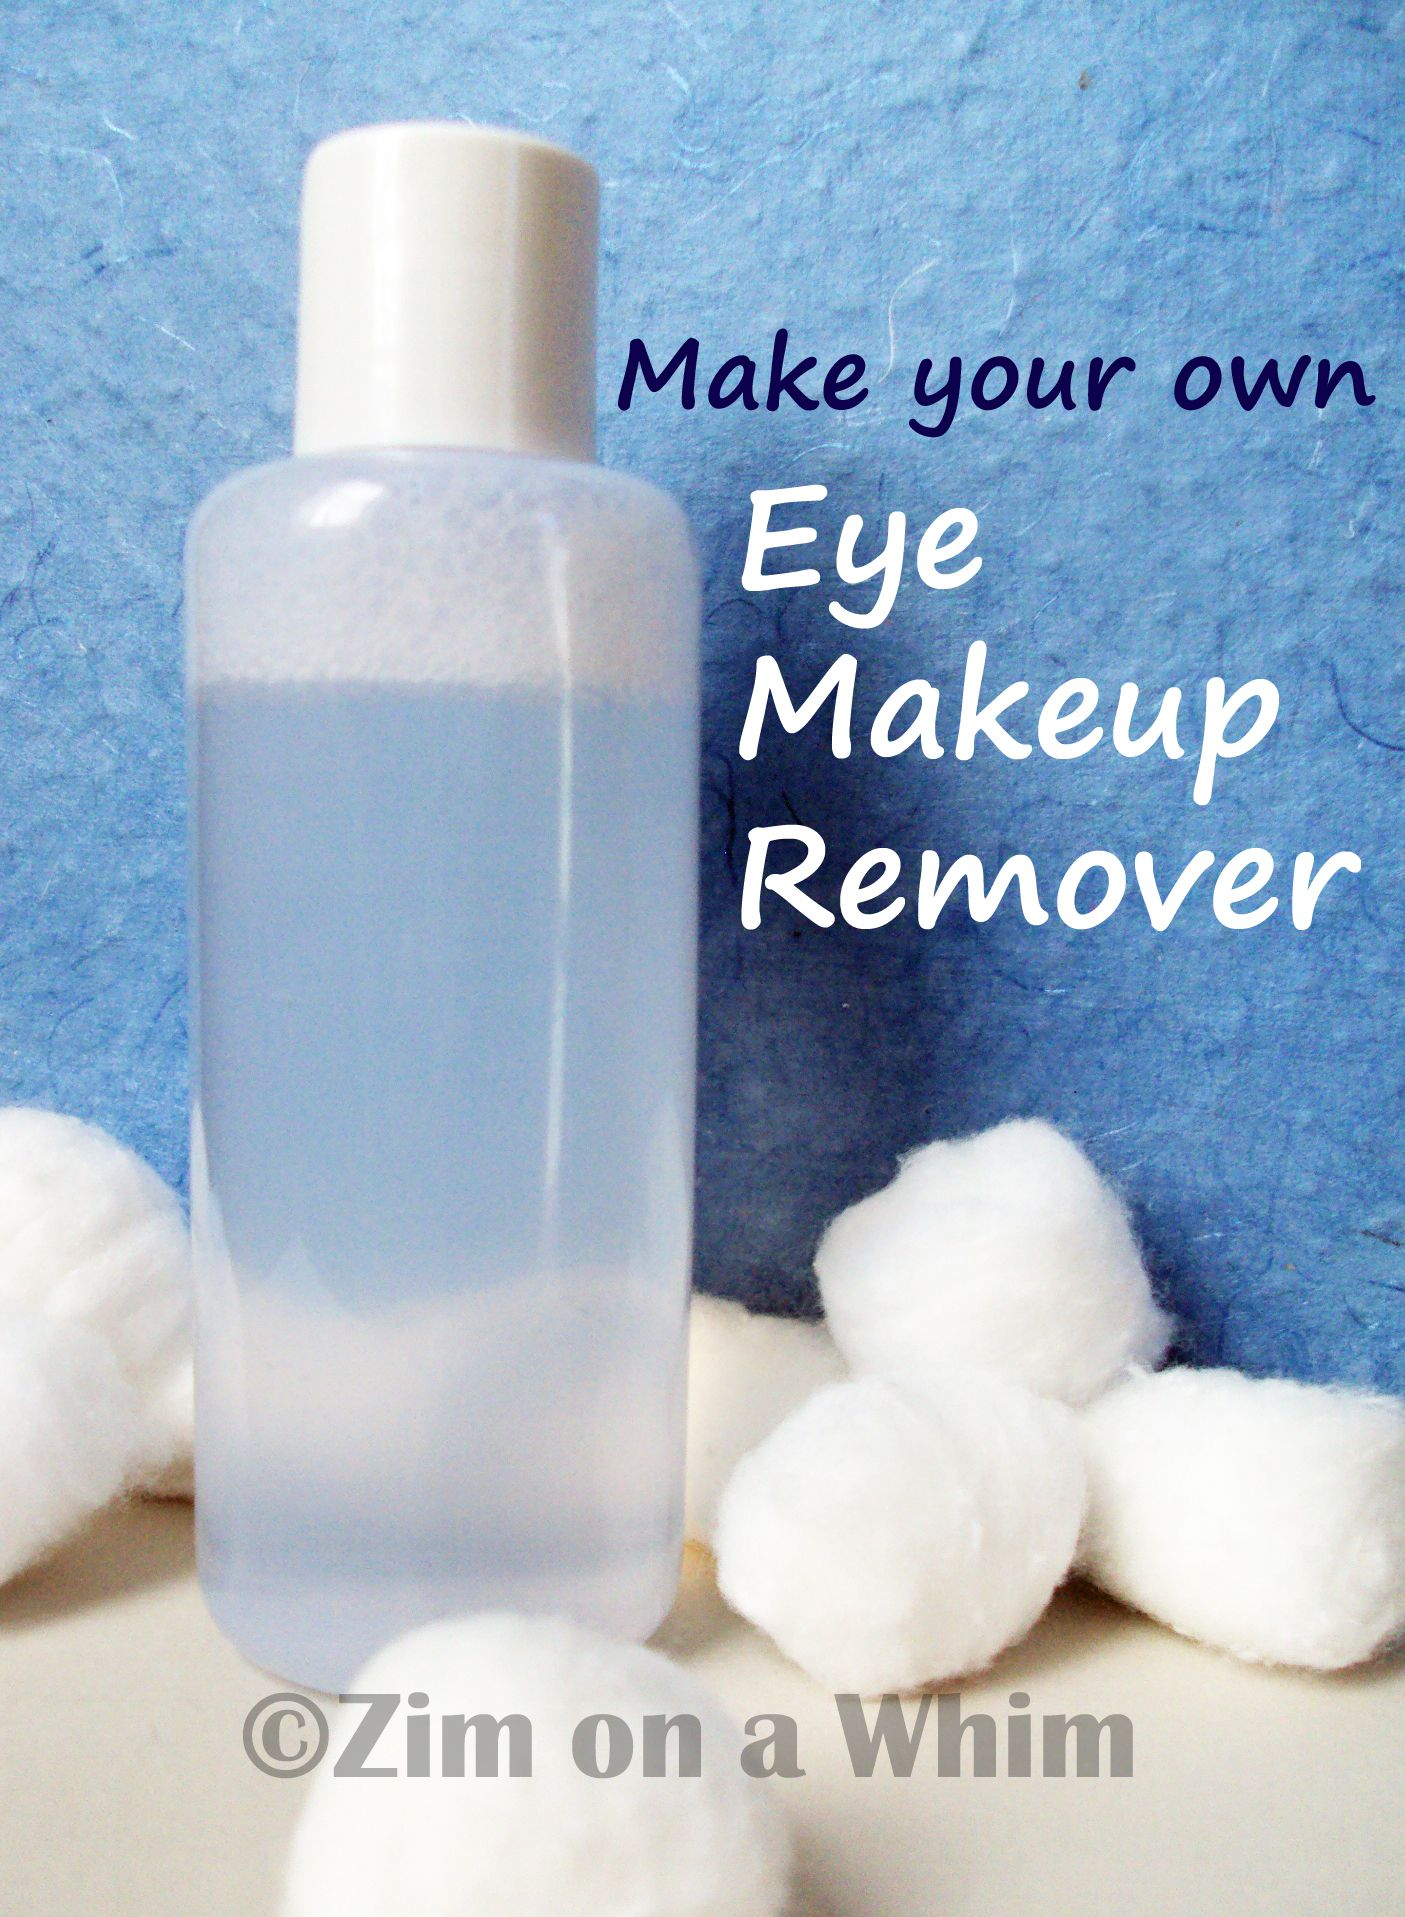 Natural Eye Makeup Remover How To Remove Eye Makeup At Home 8 Easy Methods Makeup